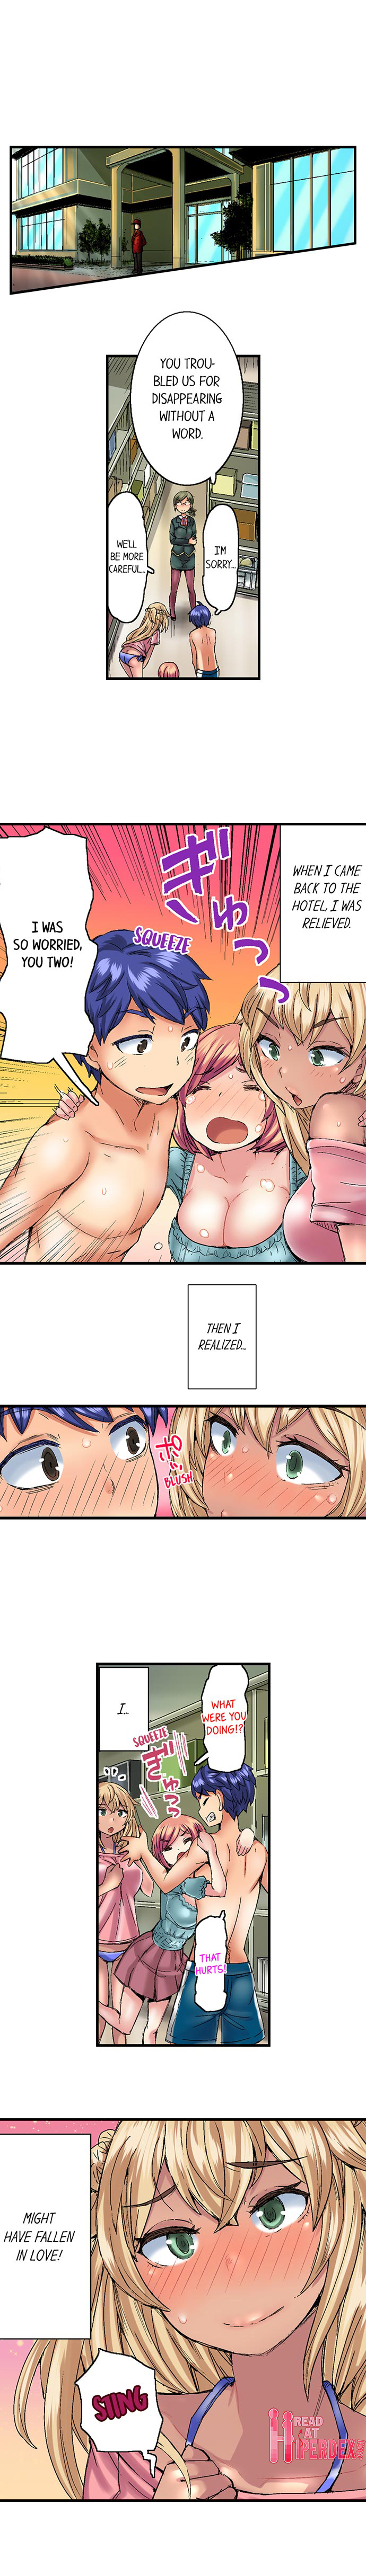 Taking a Hot Tanned Chick’s Virginity - Chapter 12 Page 9